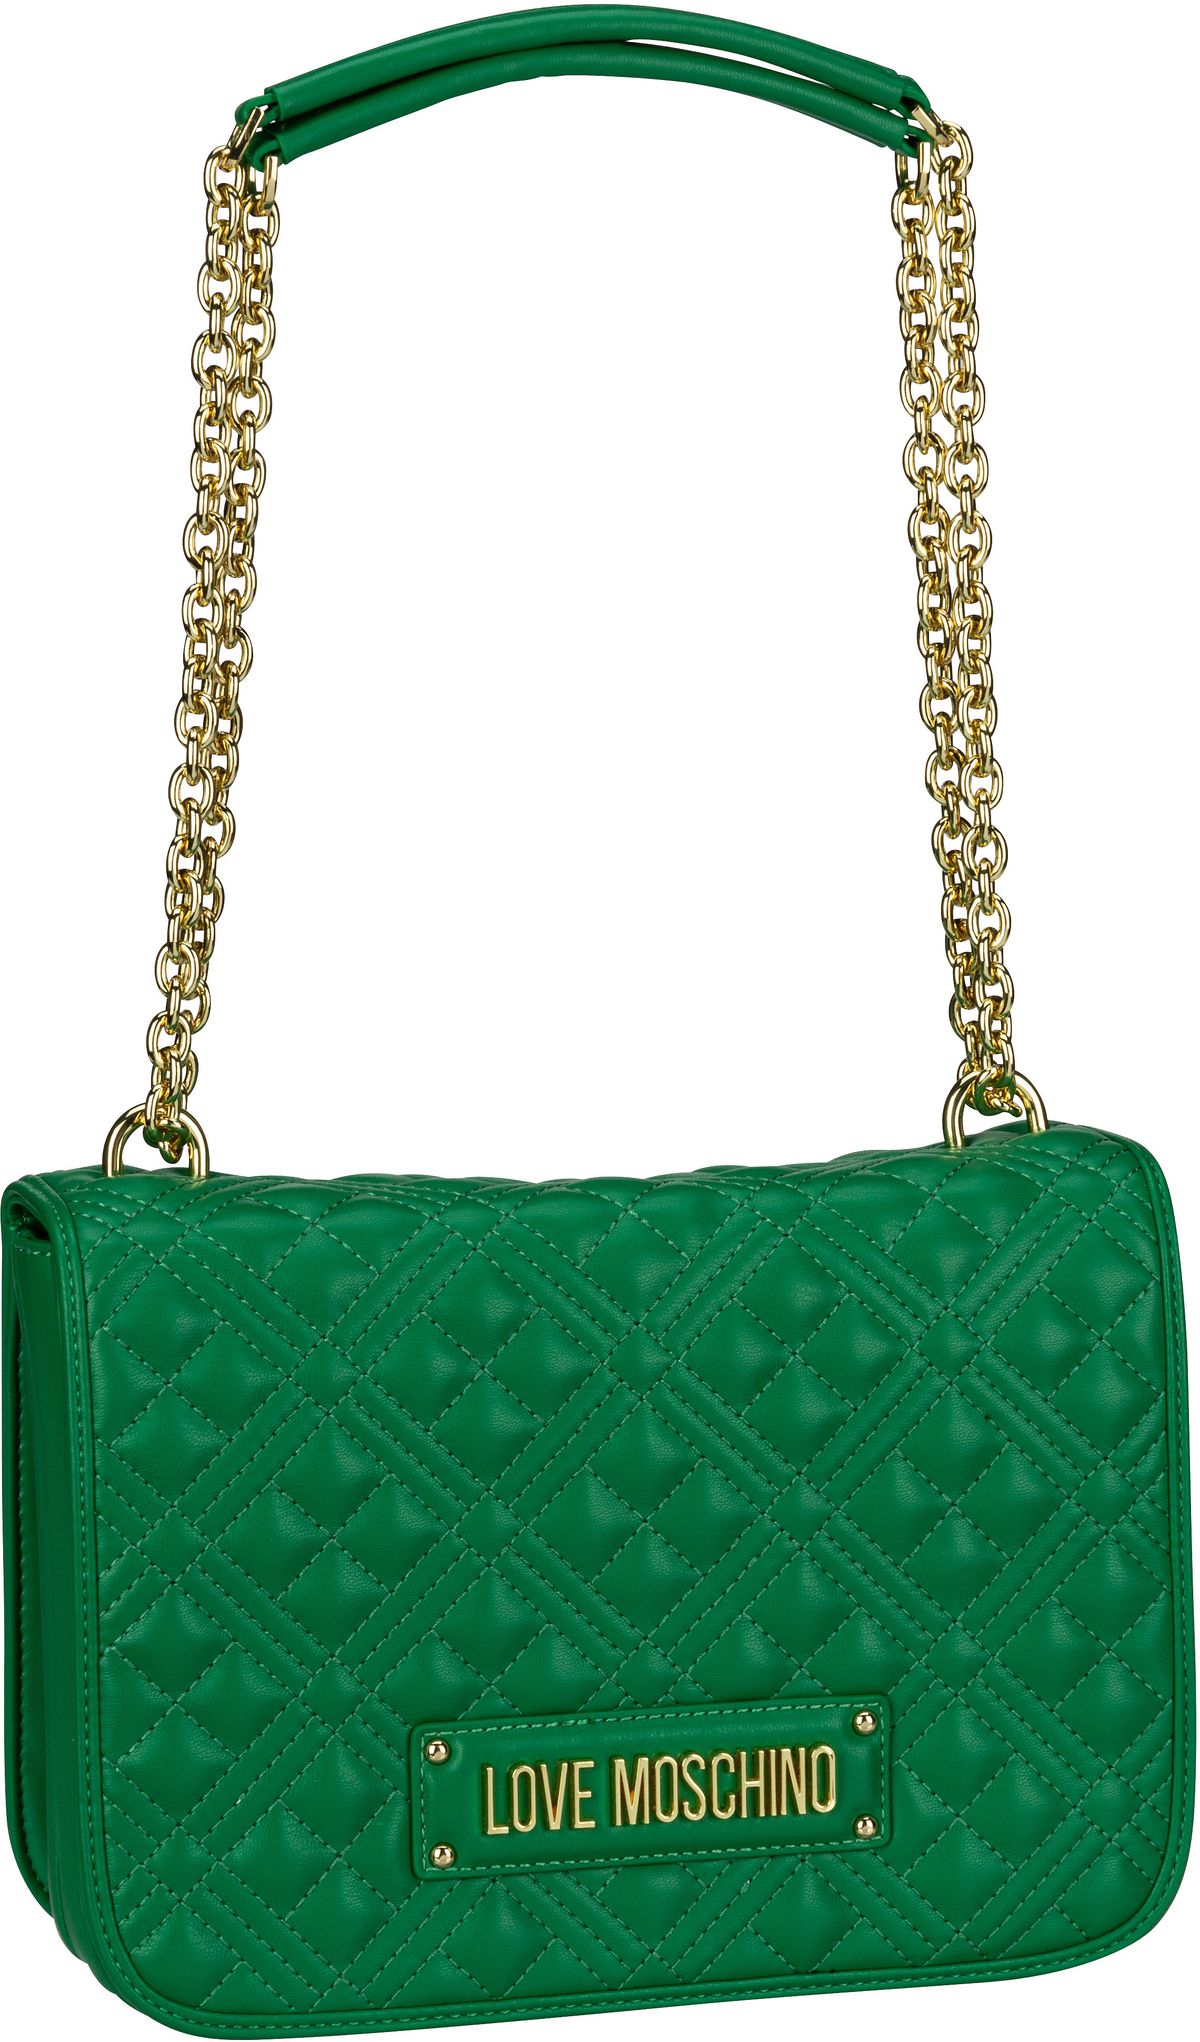 Love Moschino Quilted Bag 4000 - Green